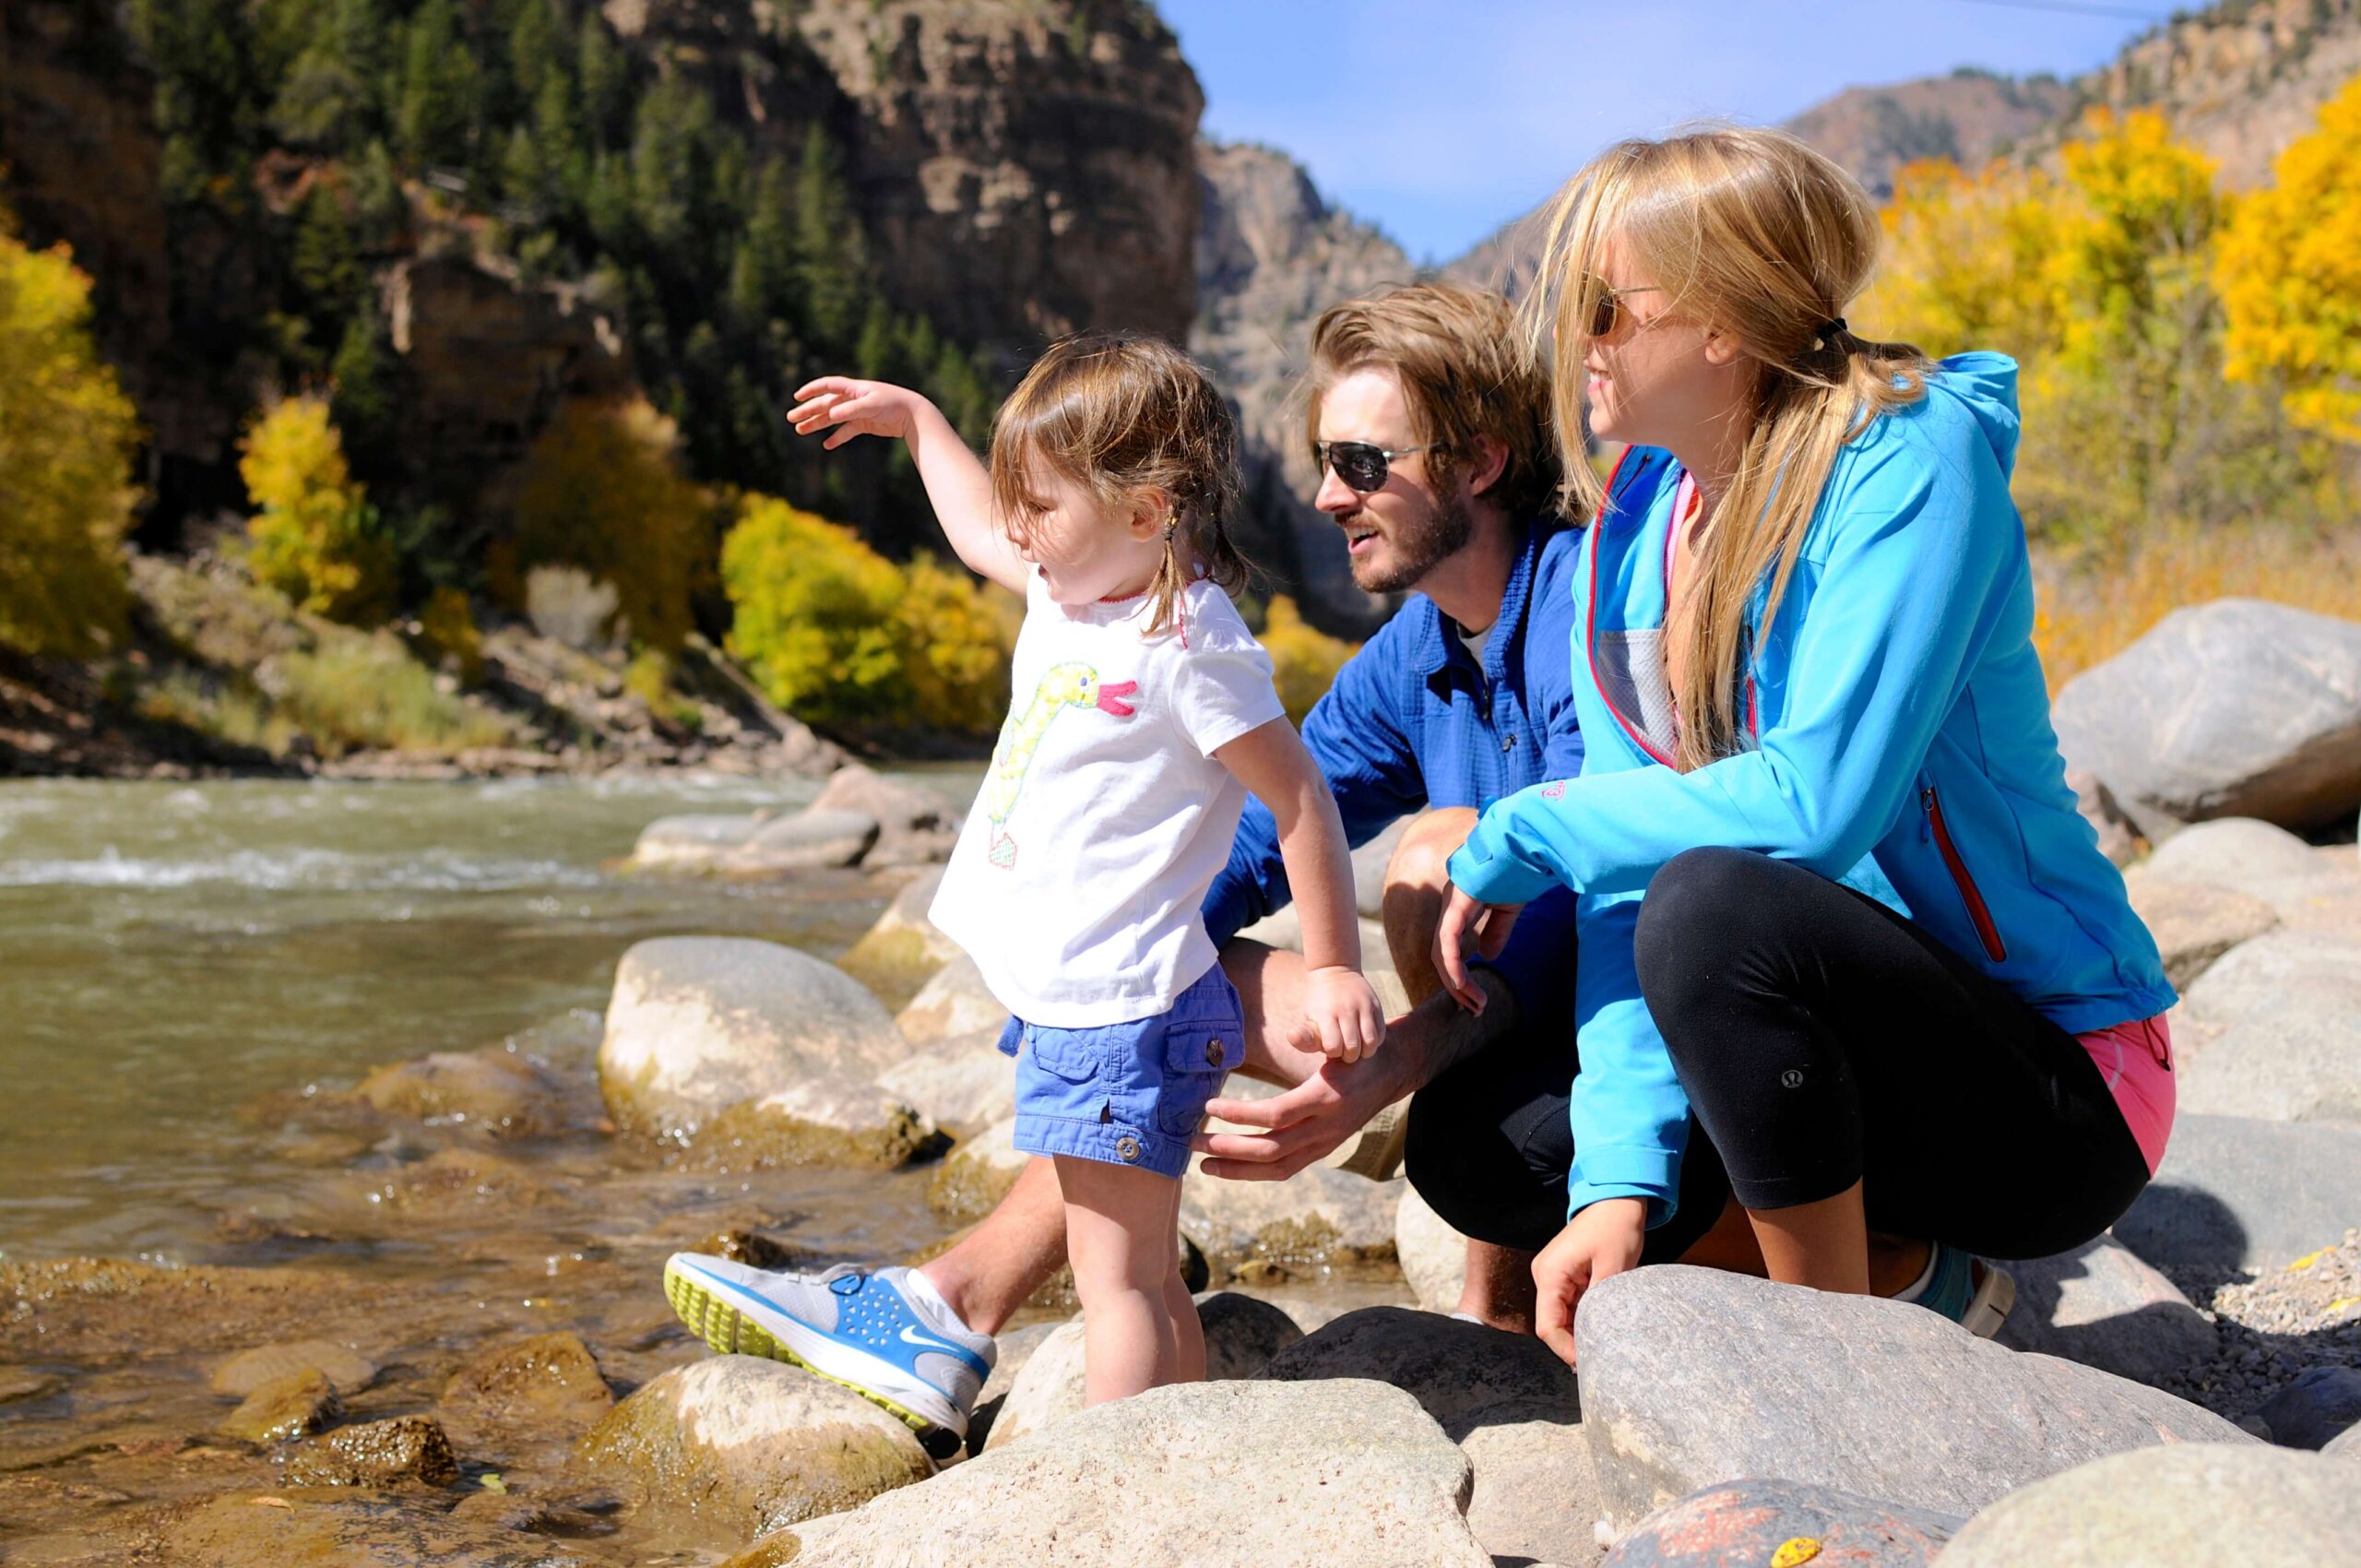 In this captivating scene, a family comprising a mother, father, and toddler enjoy a leisurely moment beside the river in Glenwood Canyon. Their gaze is fixed towards the flowing river, as if absorbing the surrounding beauty. Behind them, a backdrop of lush forest and distant canyon walls completes the picturesque setting.